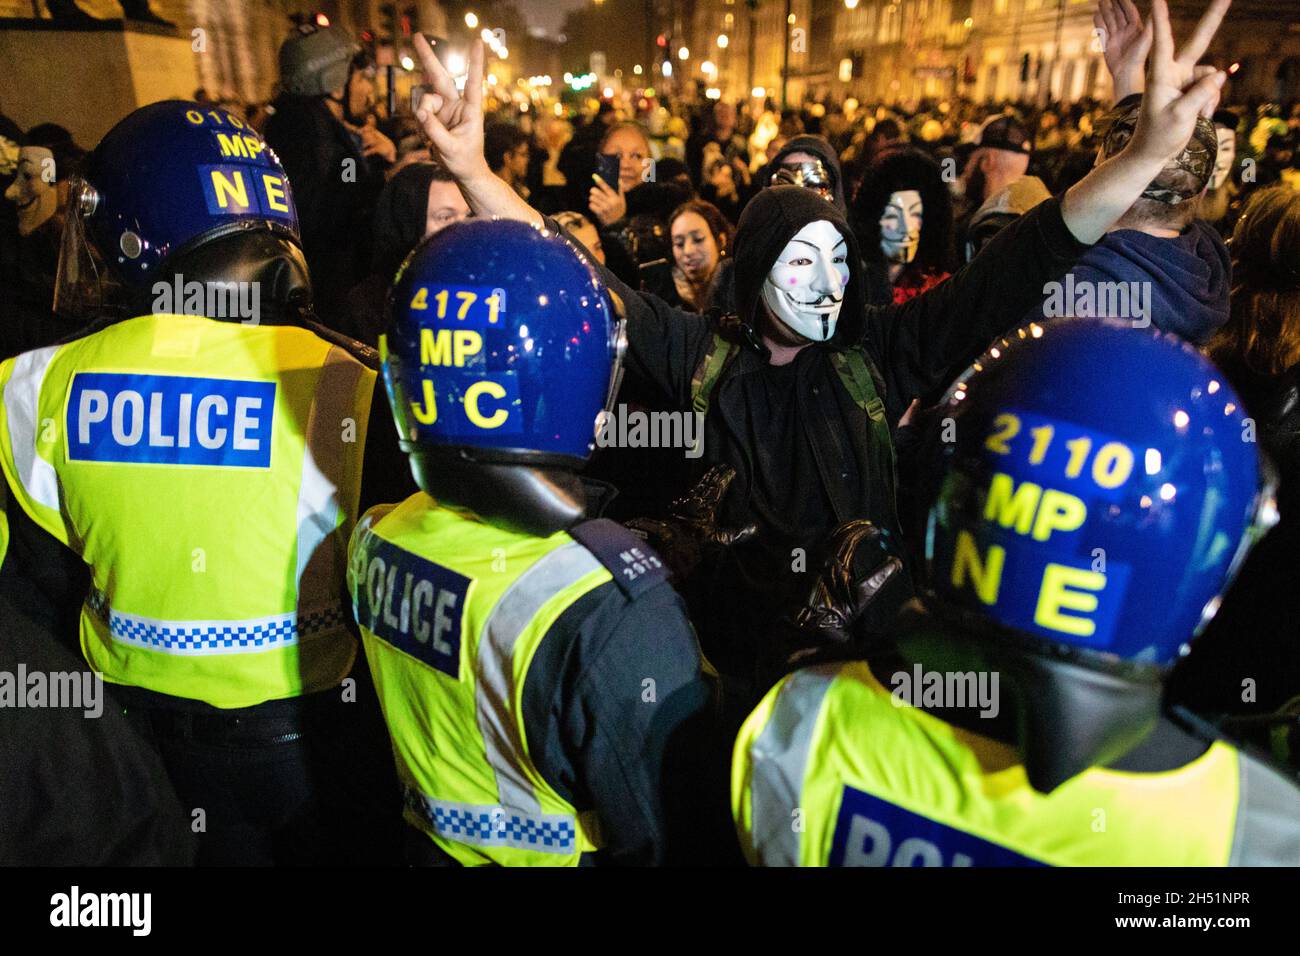 London, UK. 05th Nov, 2021. A person dressed up with an Anonymous mask on is surrounded by police outside the Houses of Parliament for the annual Million Mask march through the city. The Anonymous movement stands in solidarity for a society which is marginalised by the political elite and associated corporations. Credit: Andy Barton/Alamy Live News Stock Photo